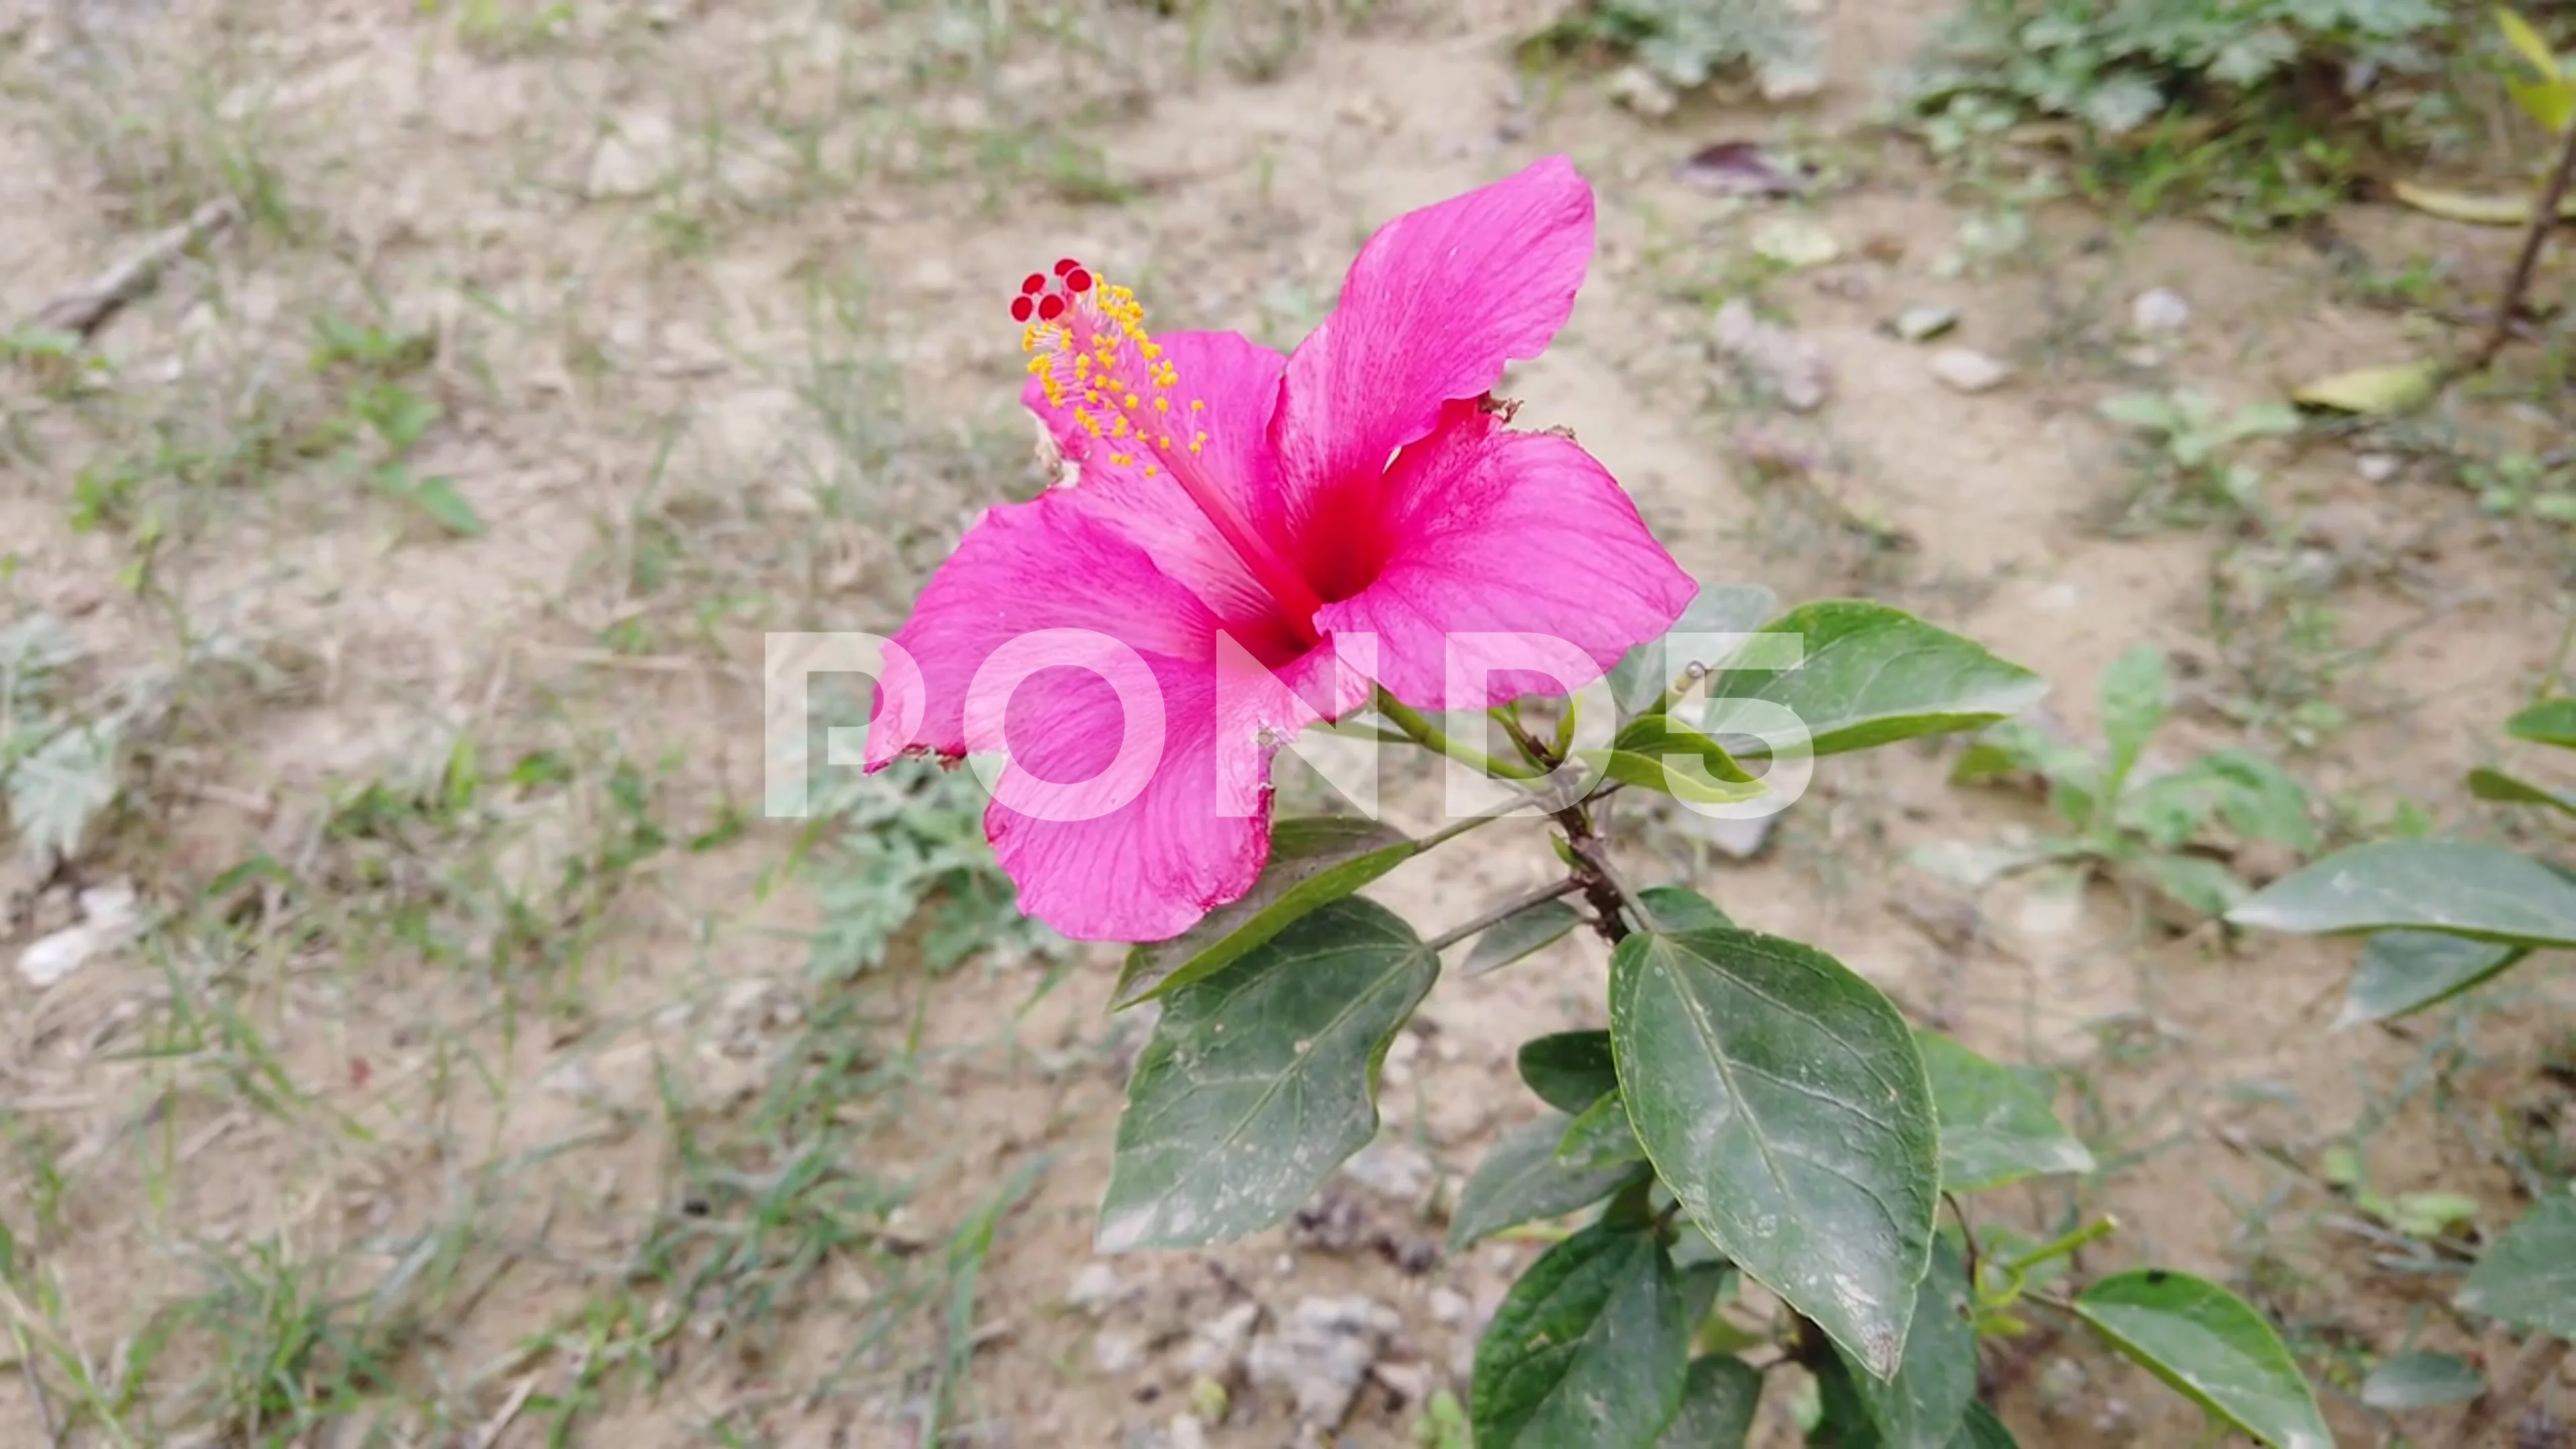 Hibiscus Flower Drawing | How to Draw Flower | flower, Hibiscus, drawing |  Hi Dear, Learn how to draw hibiscus flower in a easy way. #draw #drawing  #flowerdrawing #easydrawing #drawingtutorial | By